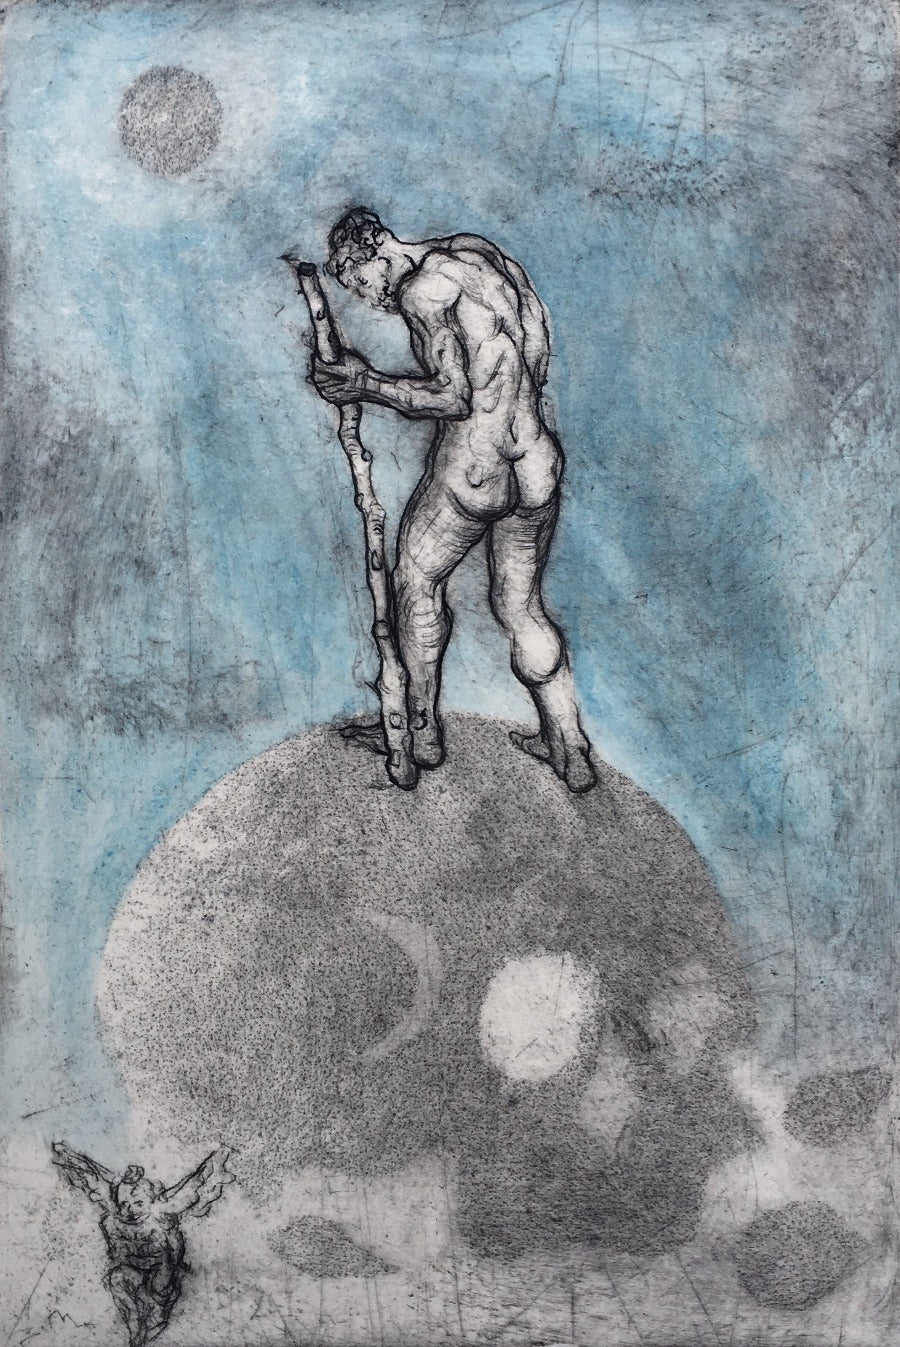 'Ecce Homo' by Mike Moor is an original drypoint and watercolour print of a figure with a staff standing on a grey sphere against a blue and grey background. Find this original art print for sale at The Biscuit Factory art gallery. 